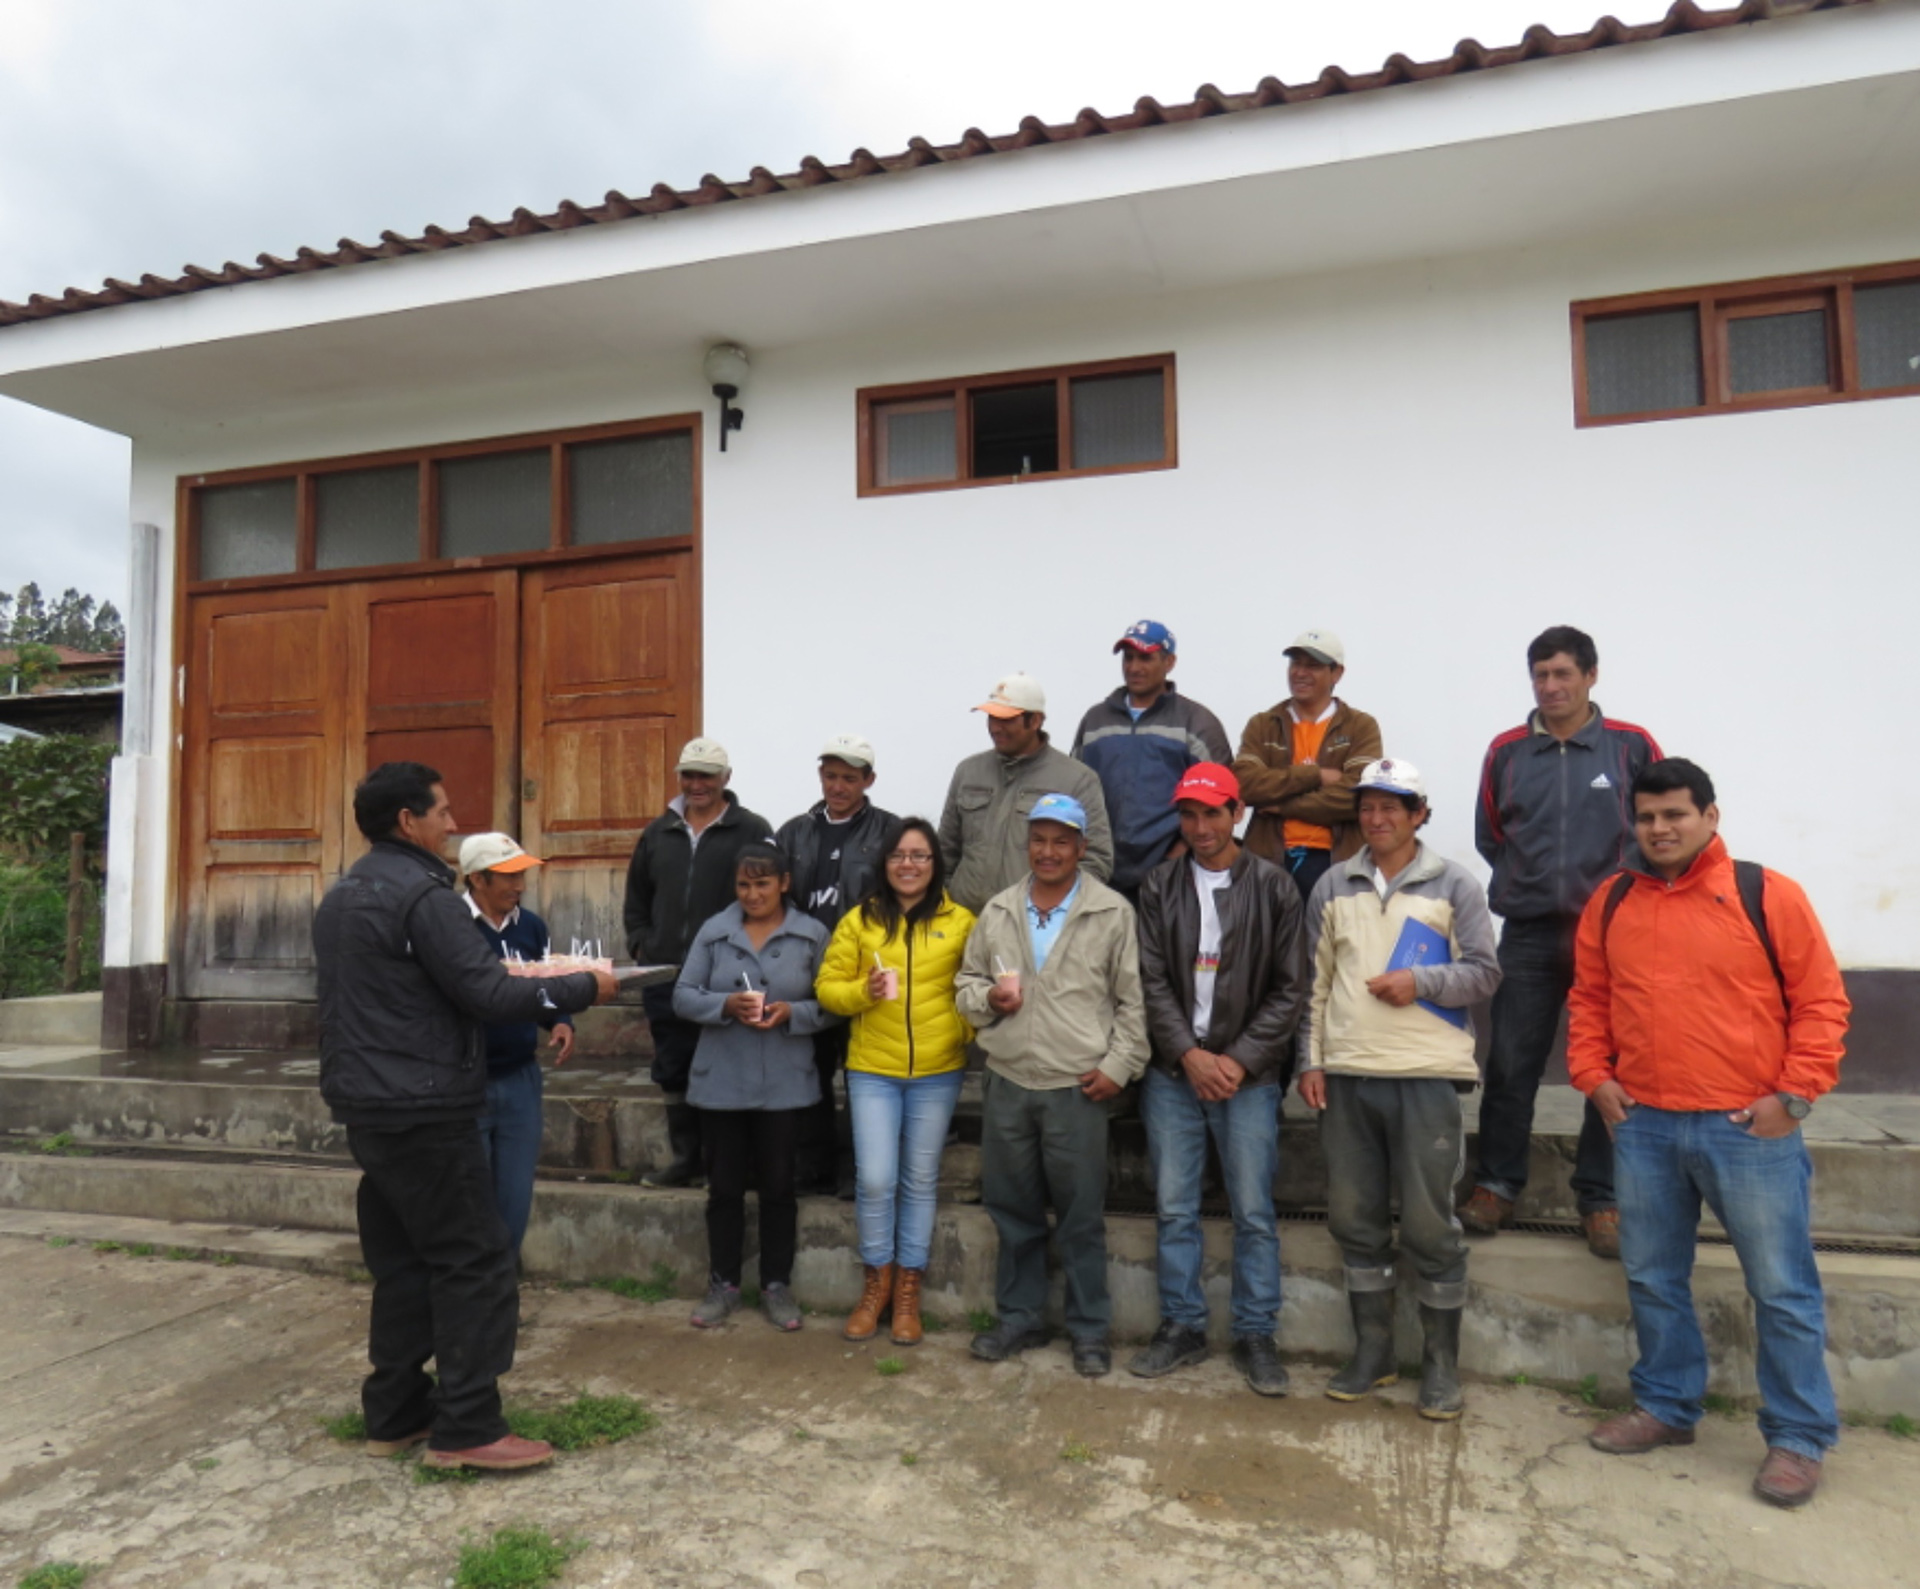 Insights from Peru: How savings and credit cooperatives (COOPACs) enable sustainable commodity produ